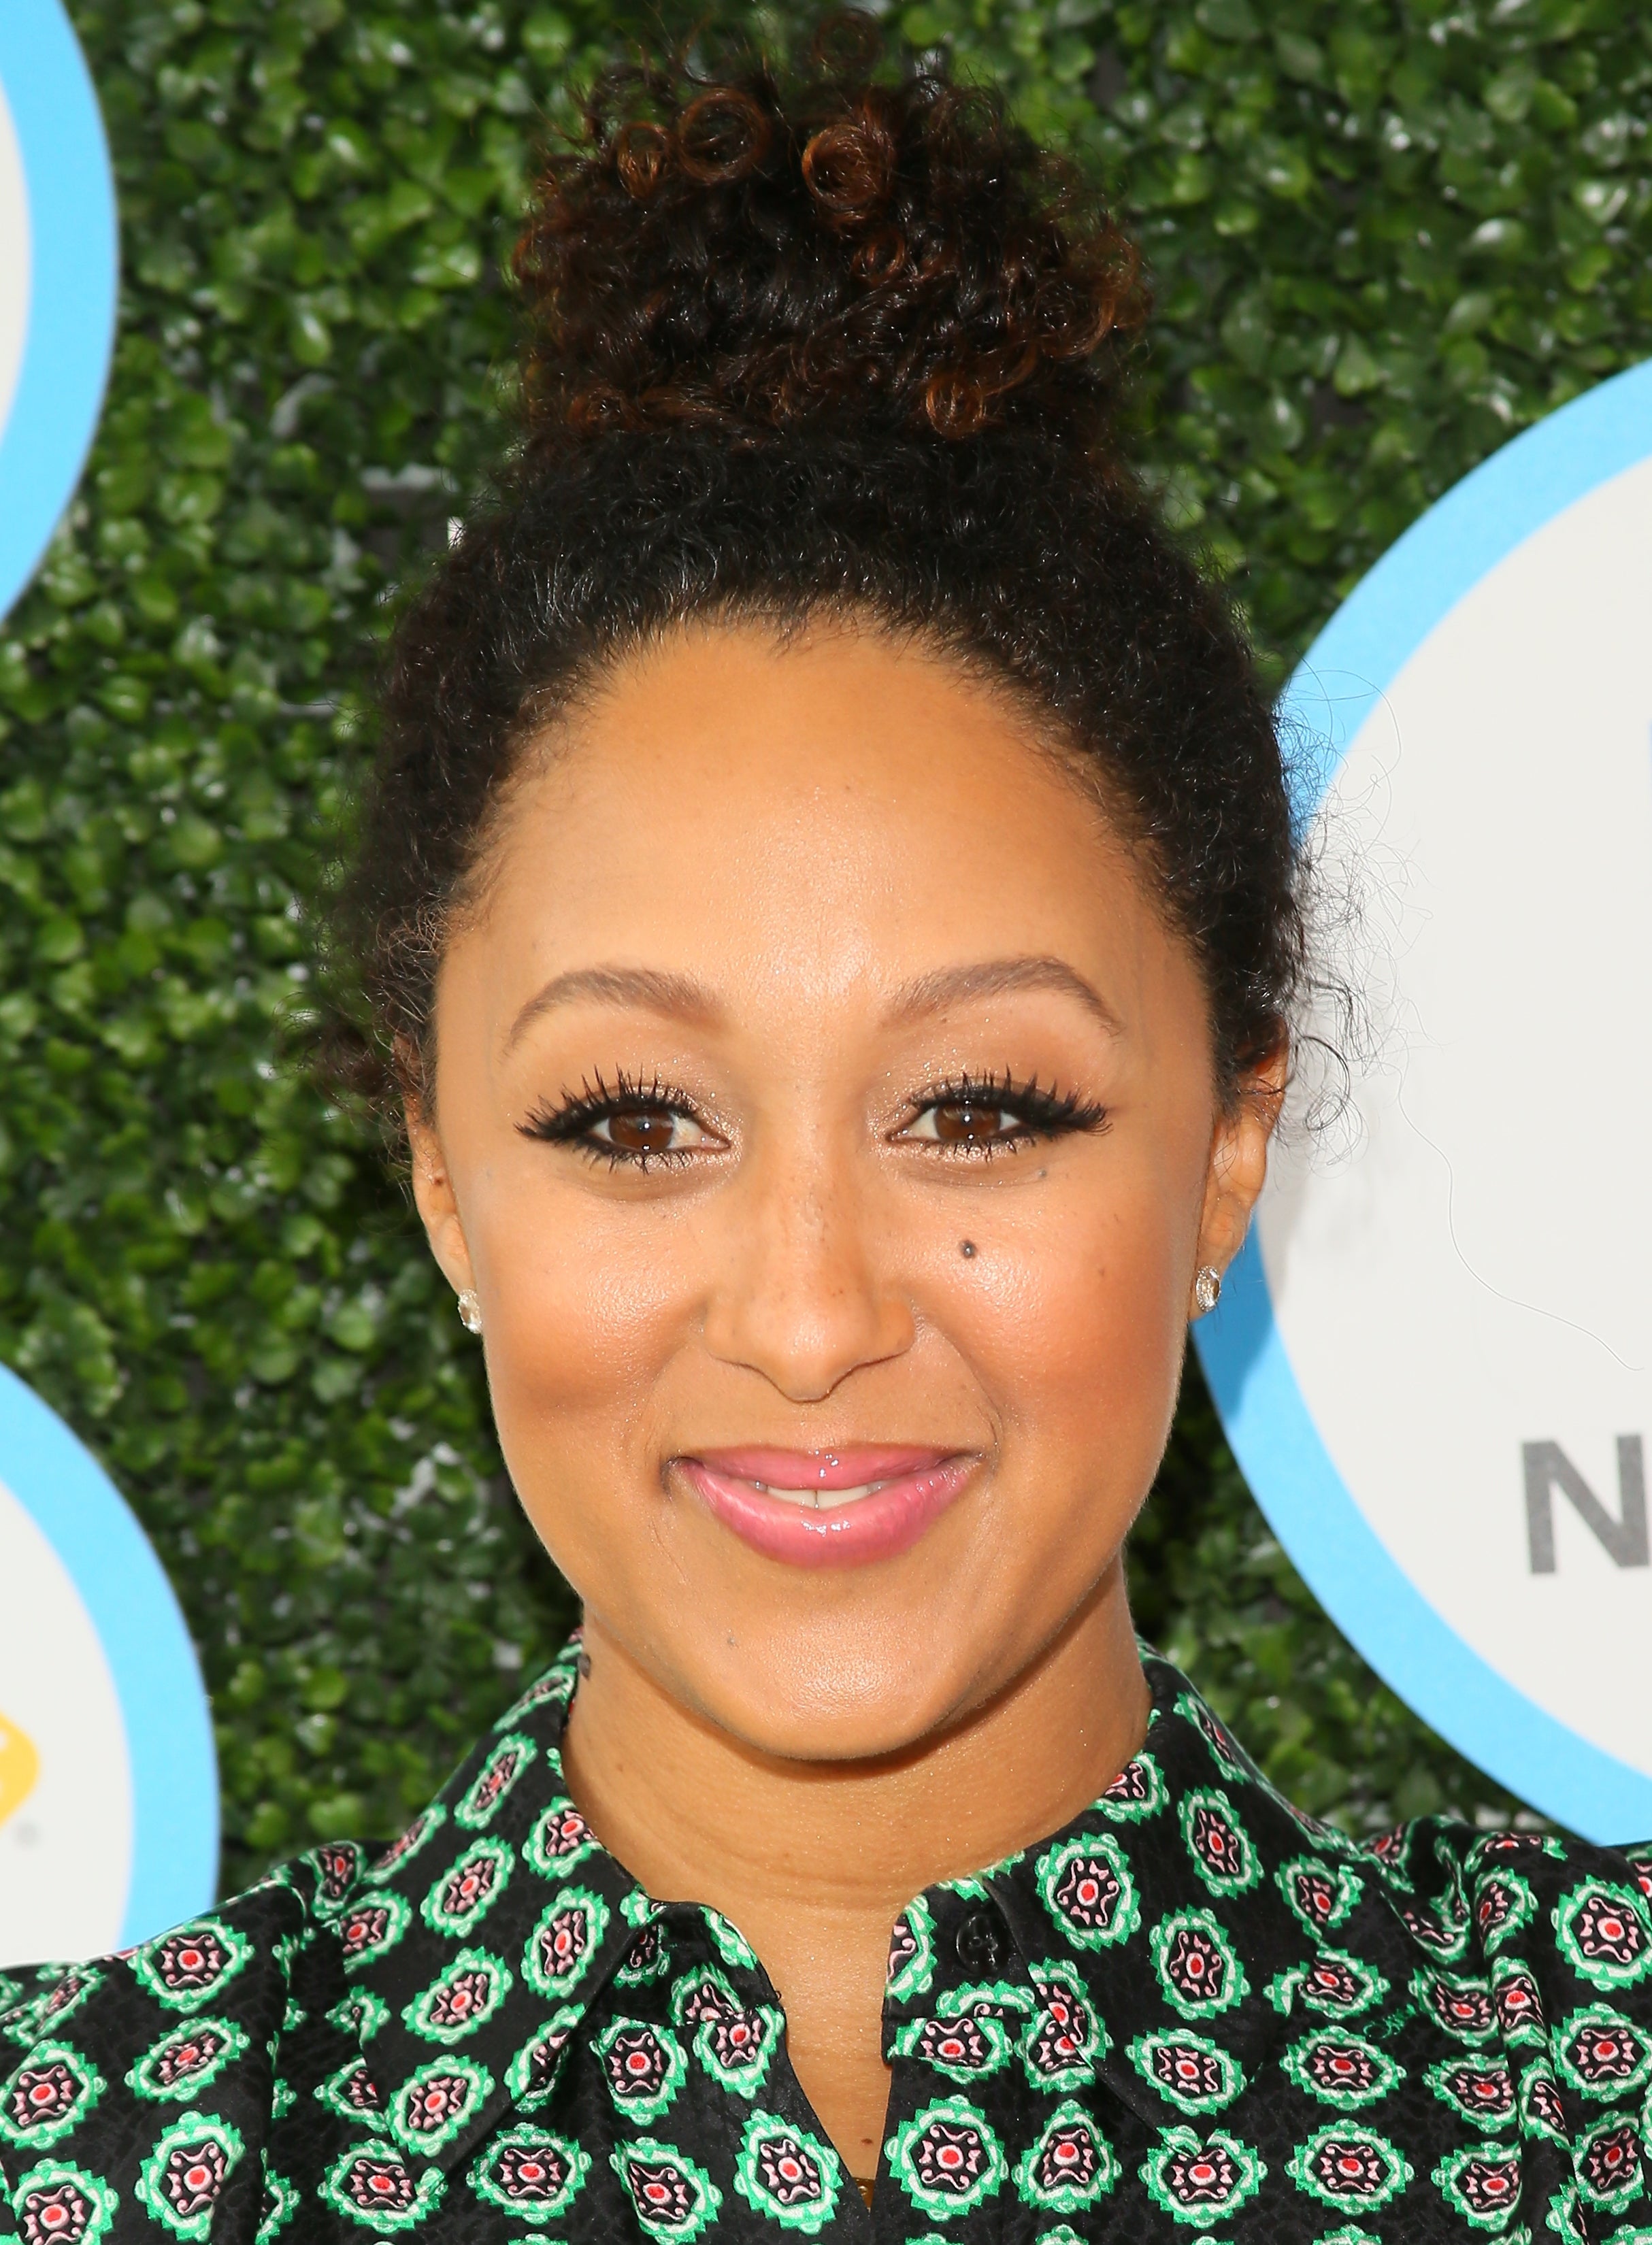 We're All in Our Feels Over Tamera Mowry-Housely’s Messy Curly Bun
